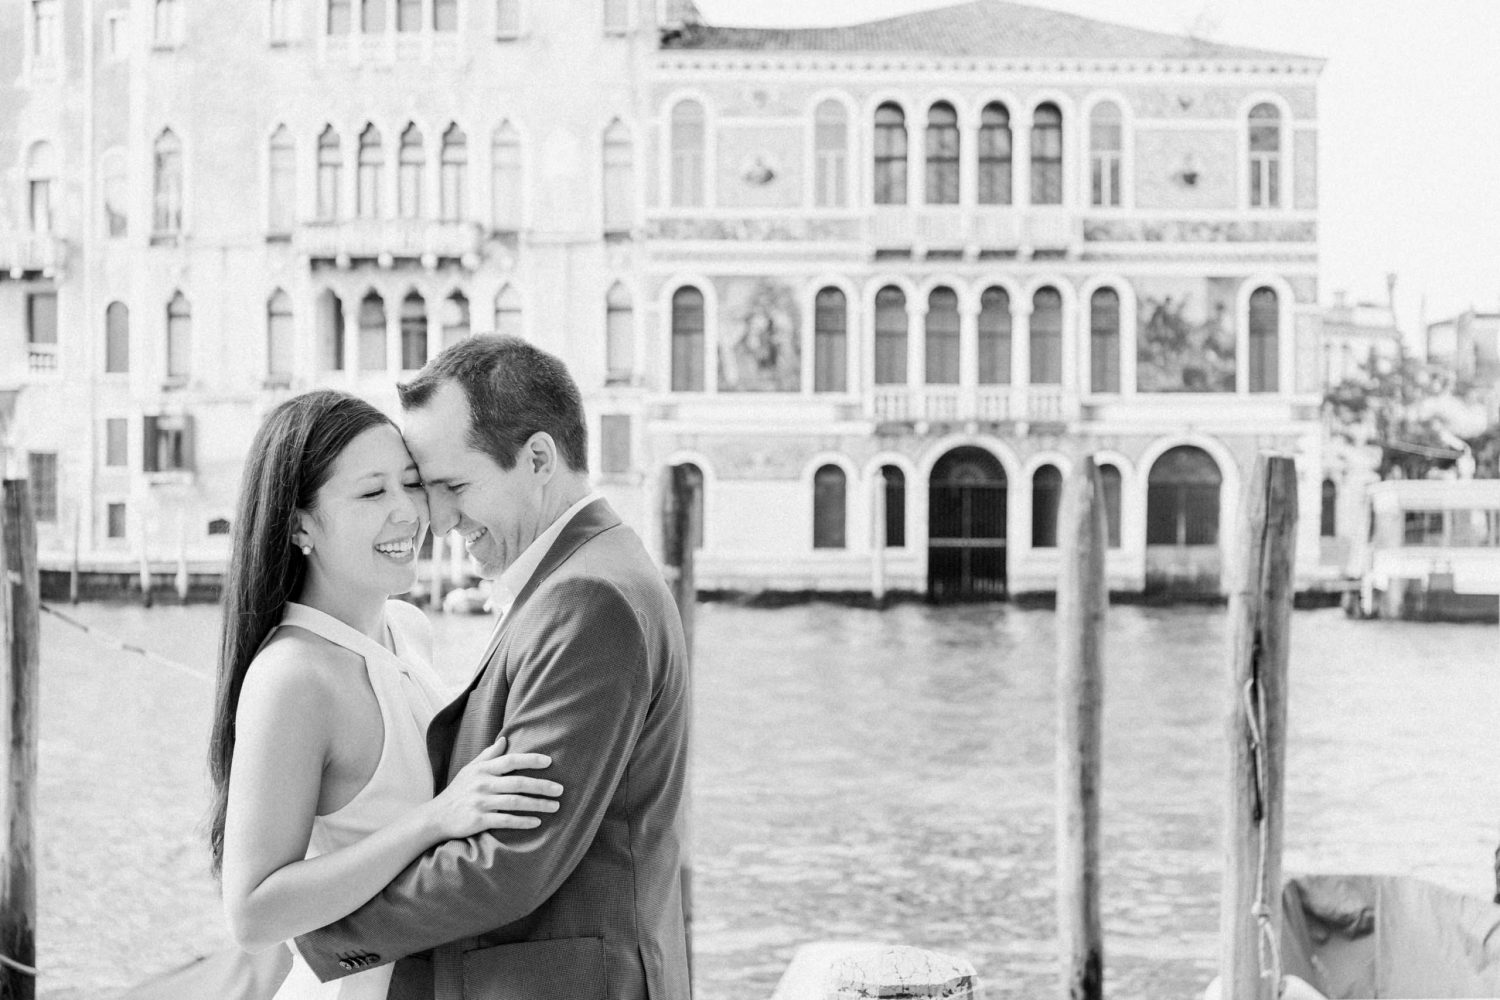 Venice Elopement Photographer, Camilla M, How Many Hours Should You Hire An Elopement Photographer For?